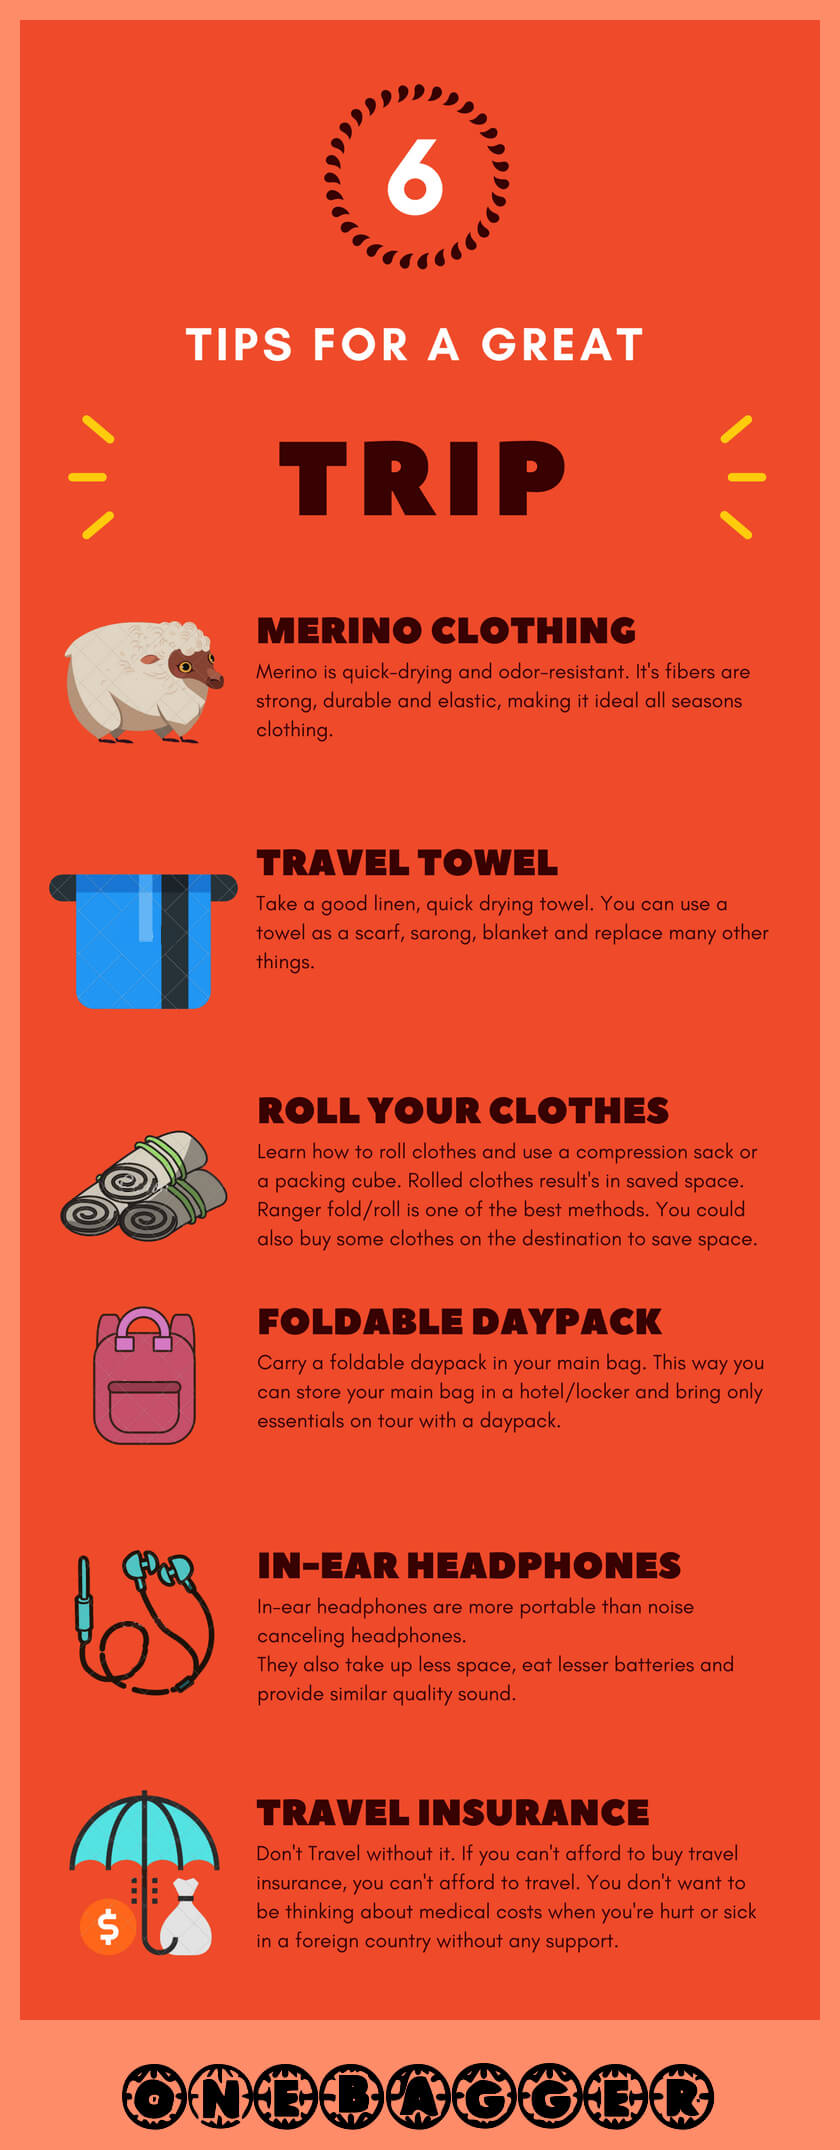 trip guide tips